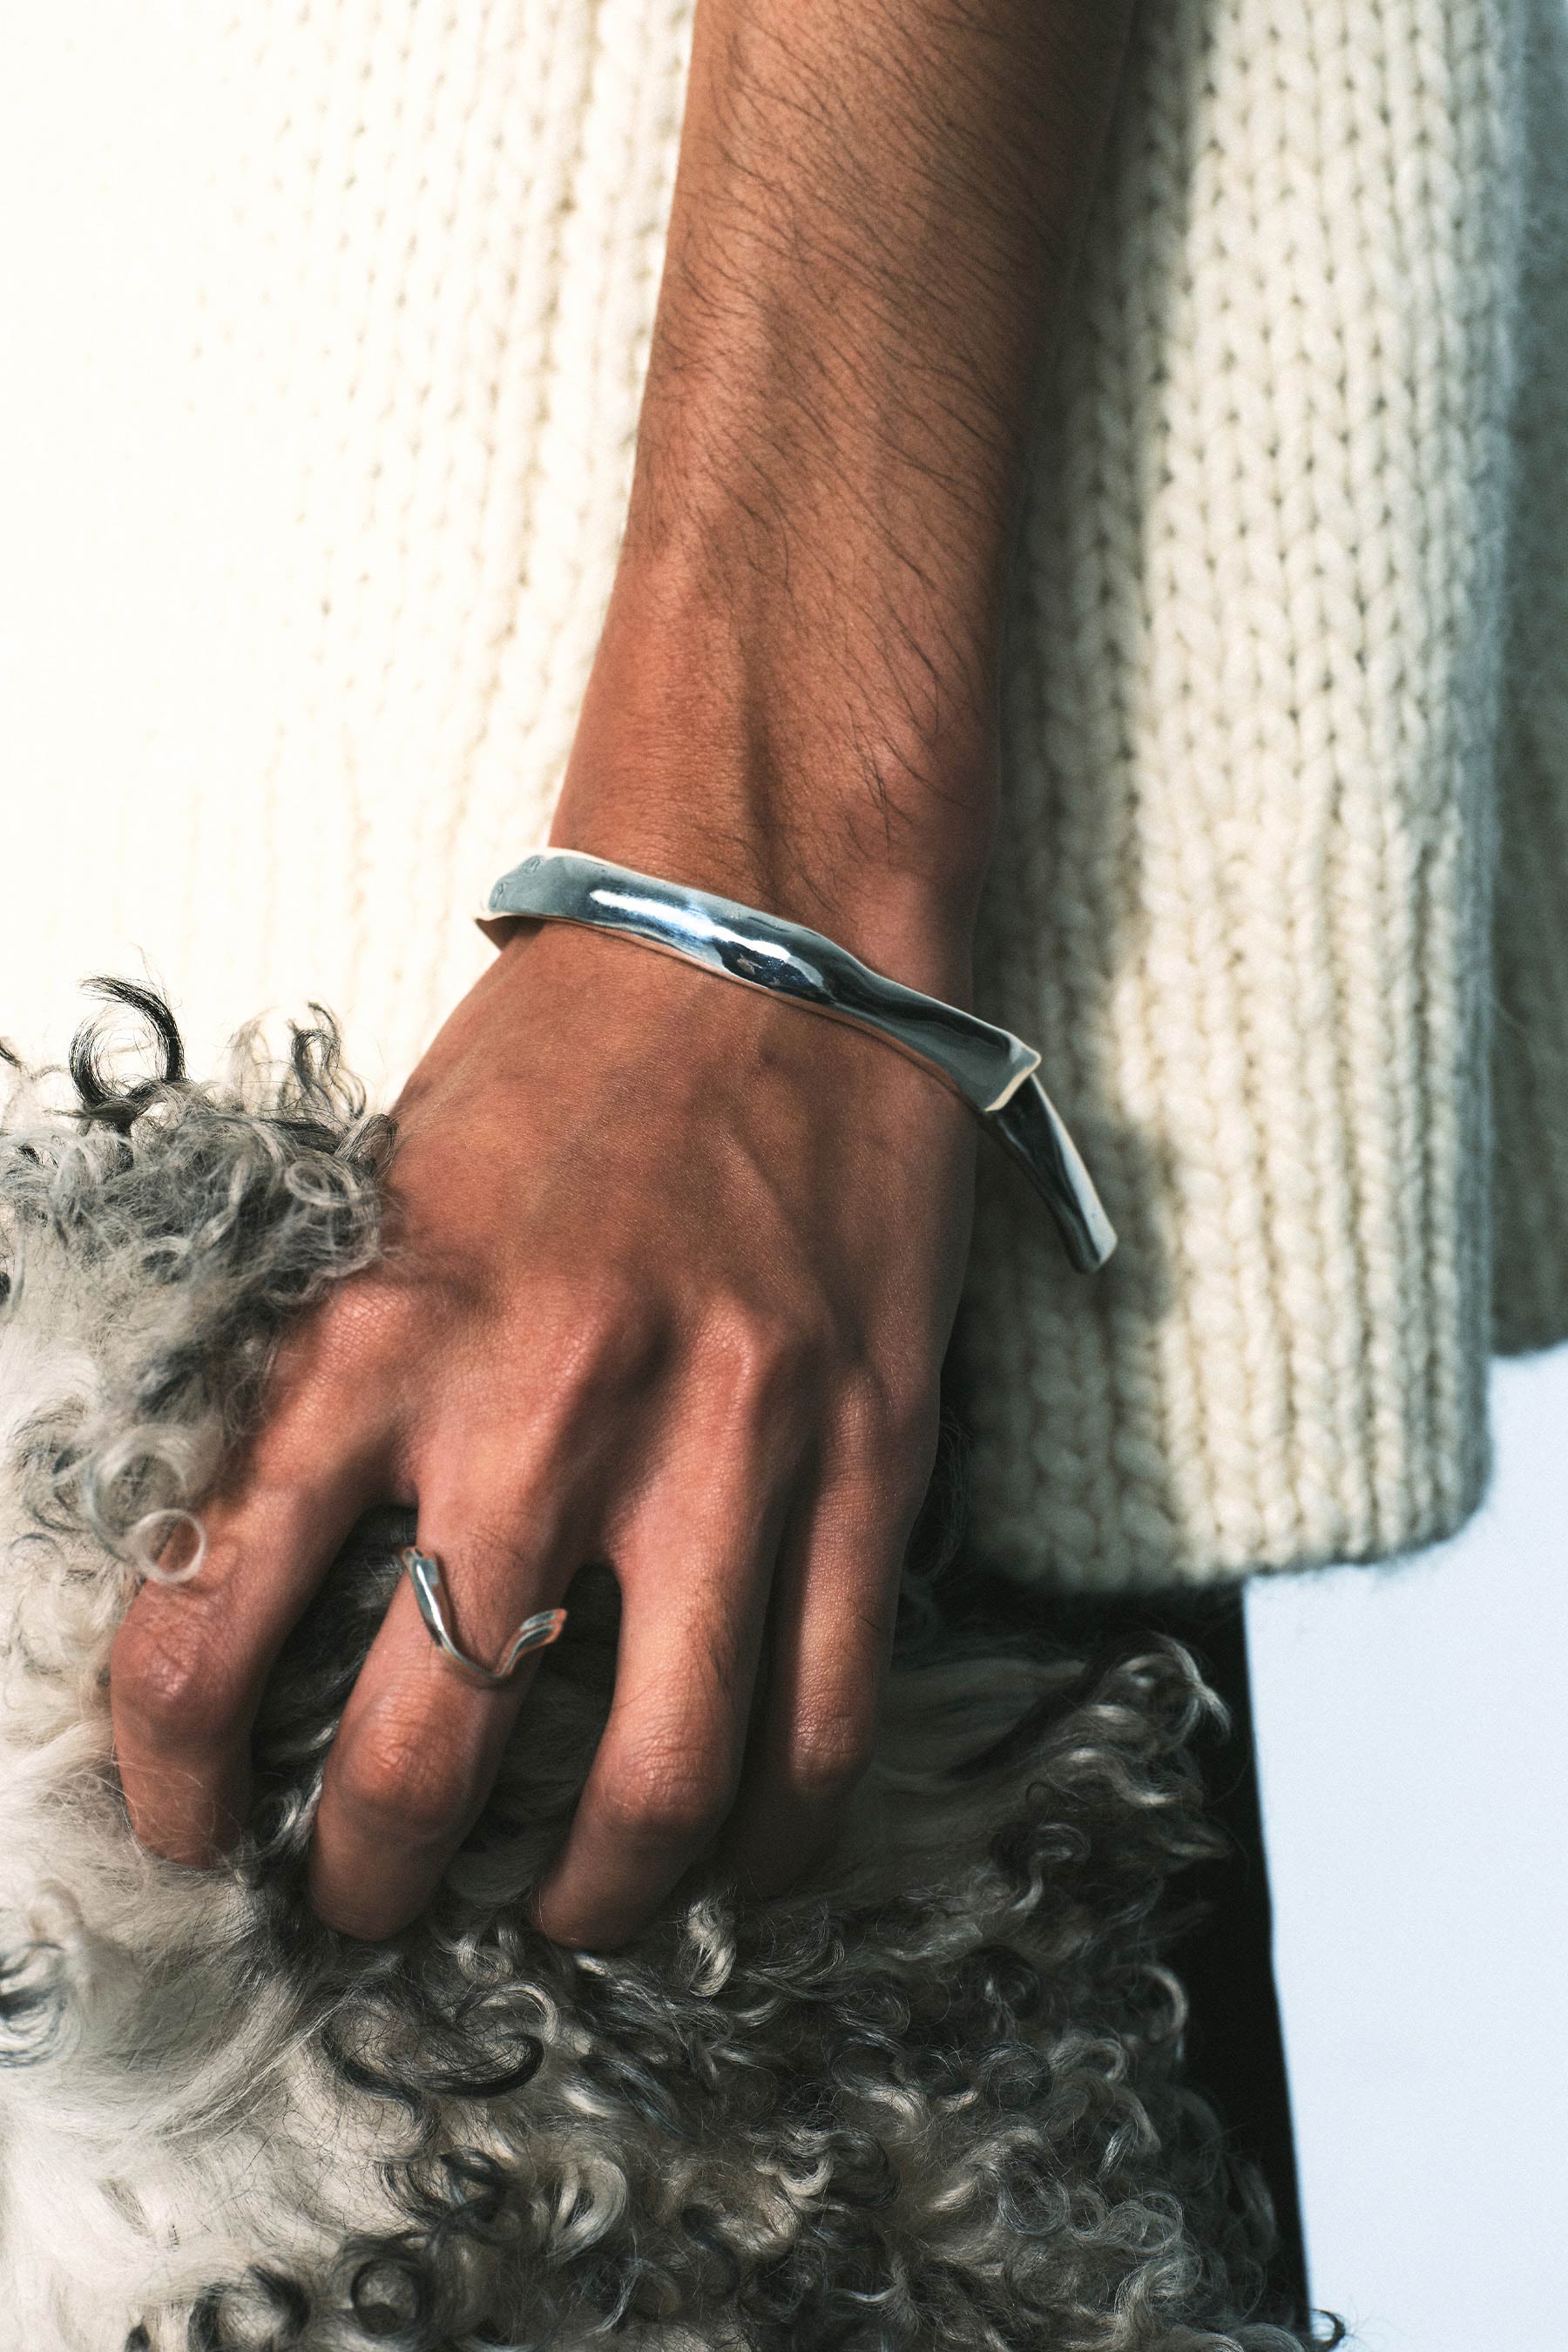 Silver Hammer-crafted Bangle